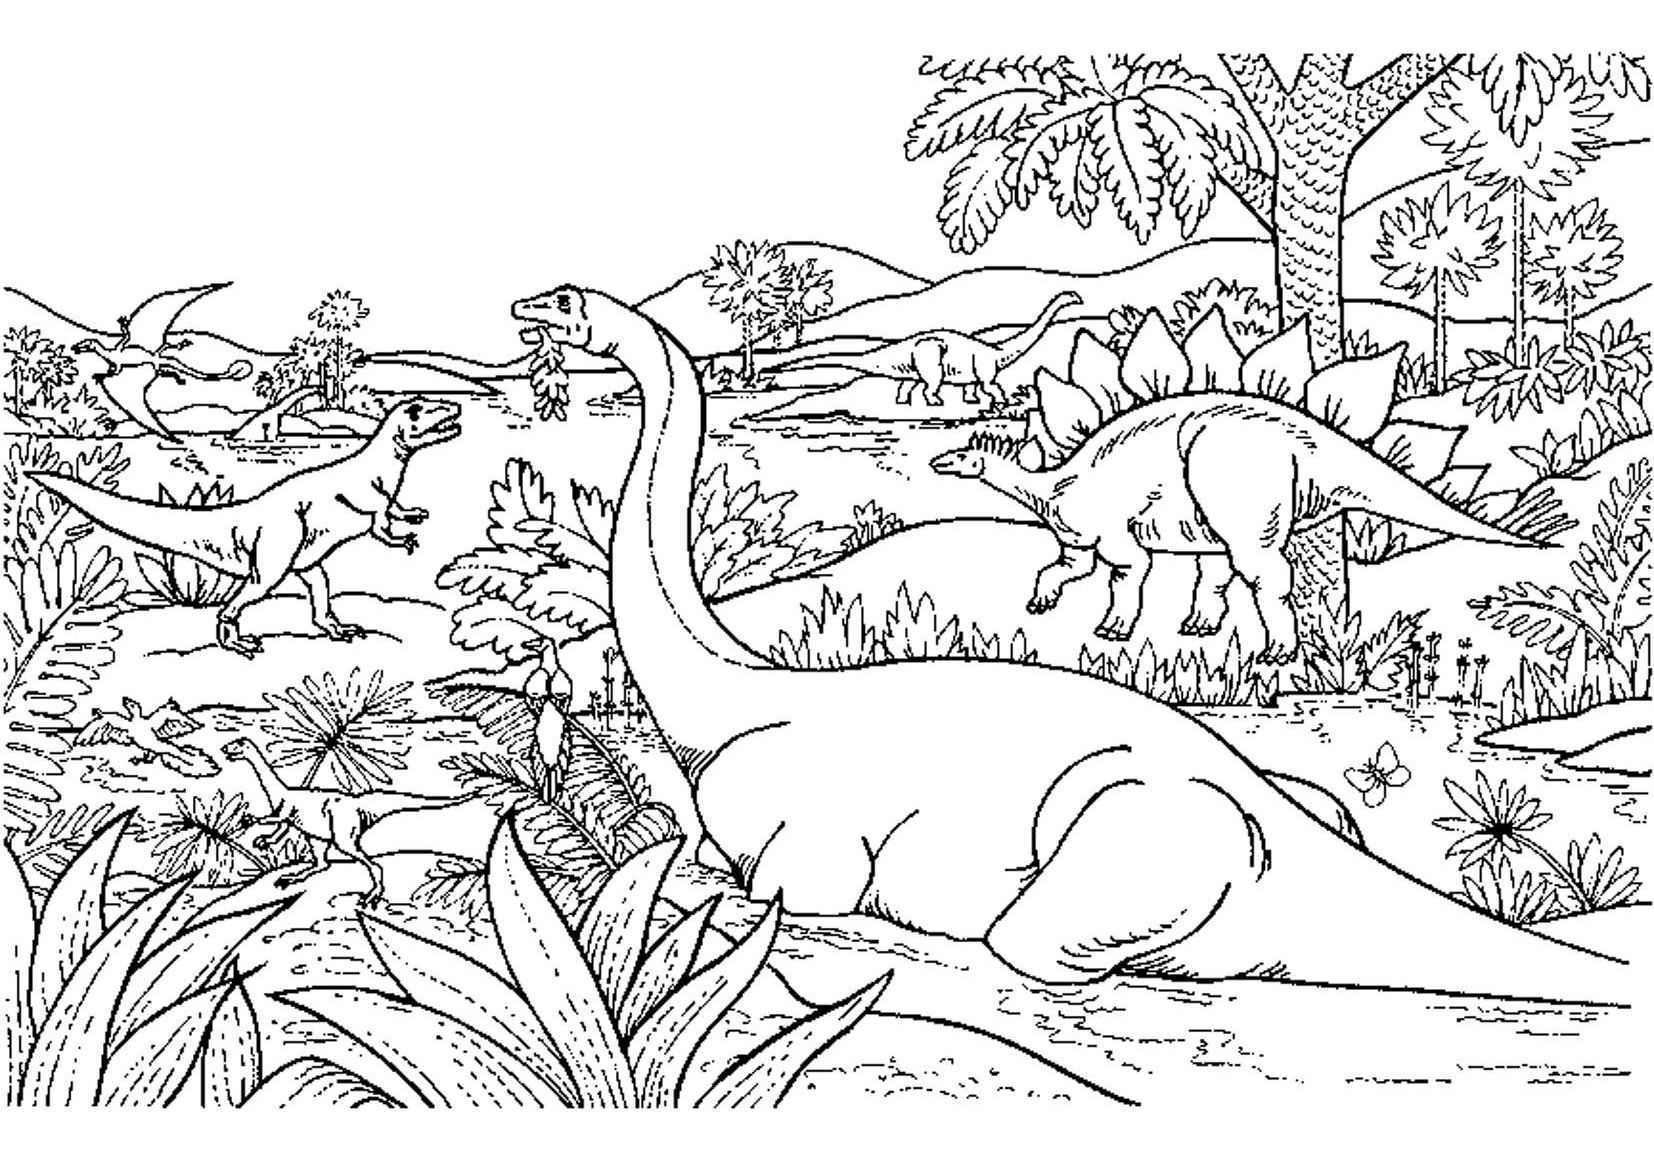 Advanced Dinosaur Coloring Page Difficult and Hard to Color Pages